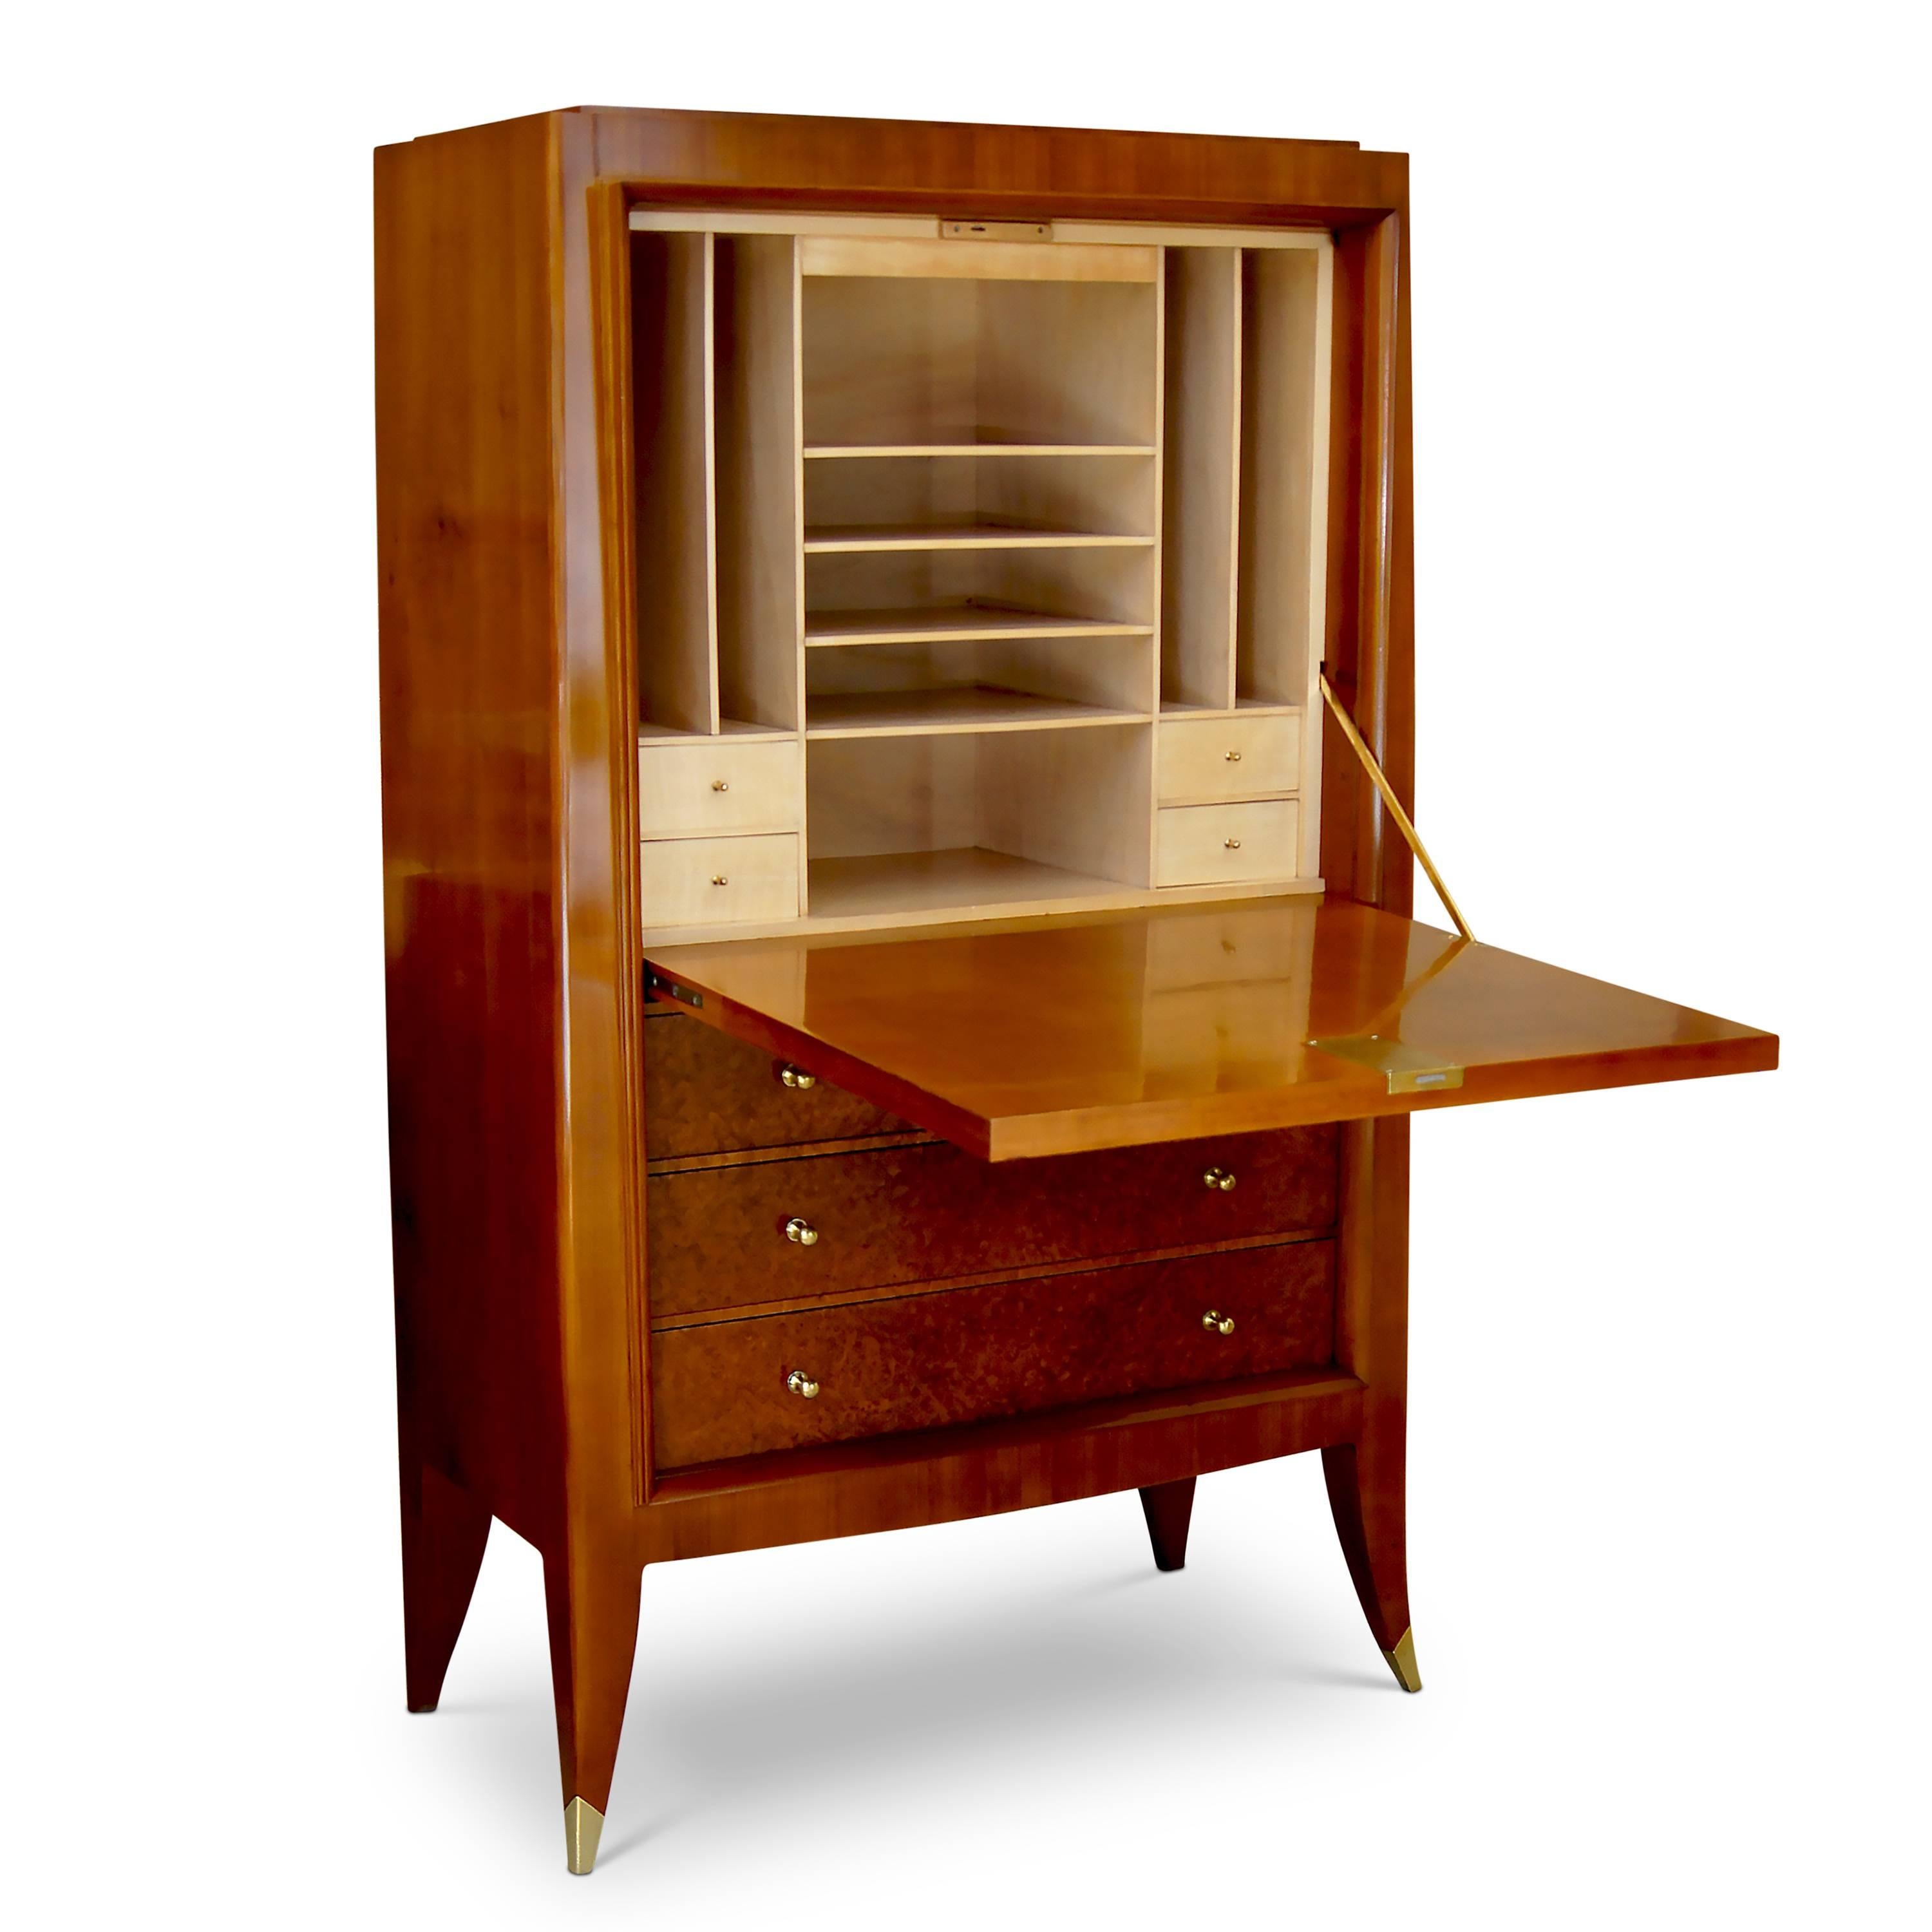 Fine cabinet (forming an original custom set with a storage cabinet, also available) by Alfred Porteneuve (1869-1949). The sculptural case-piece is superlatively crafted in fruitwood (likely cherry) with amboyna (burl walnut) veneer on the doors. A